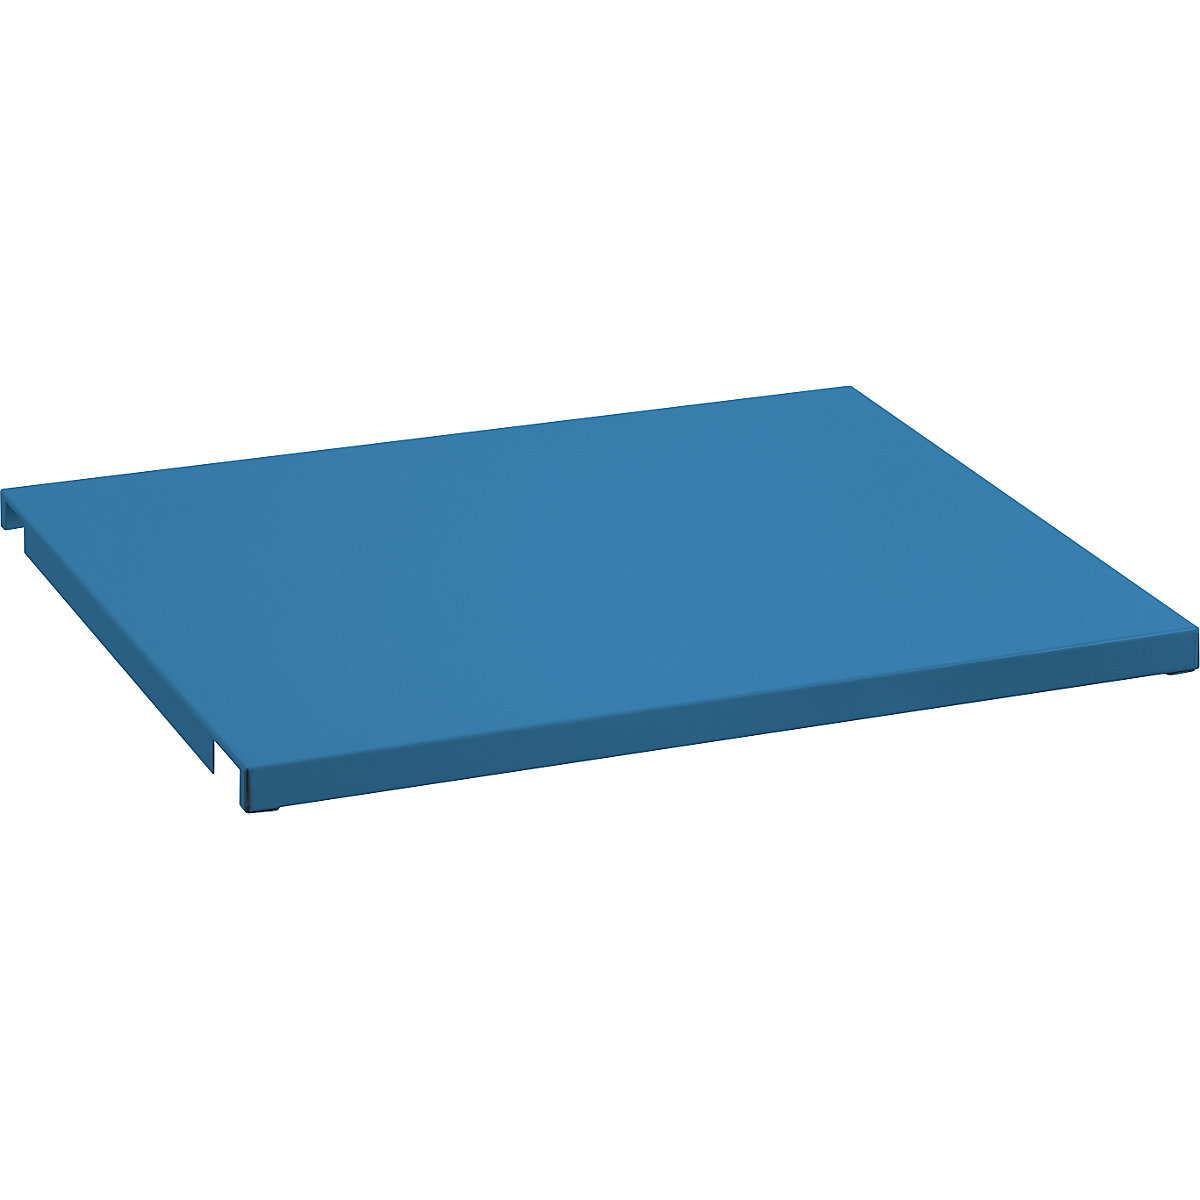 Sheet metal cover for fixed frame – LISTA, for WxD 1290 x 860 mm, light blue